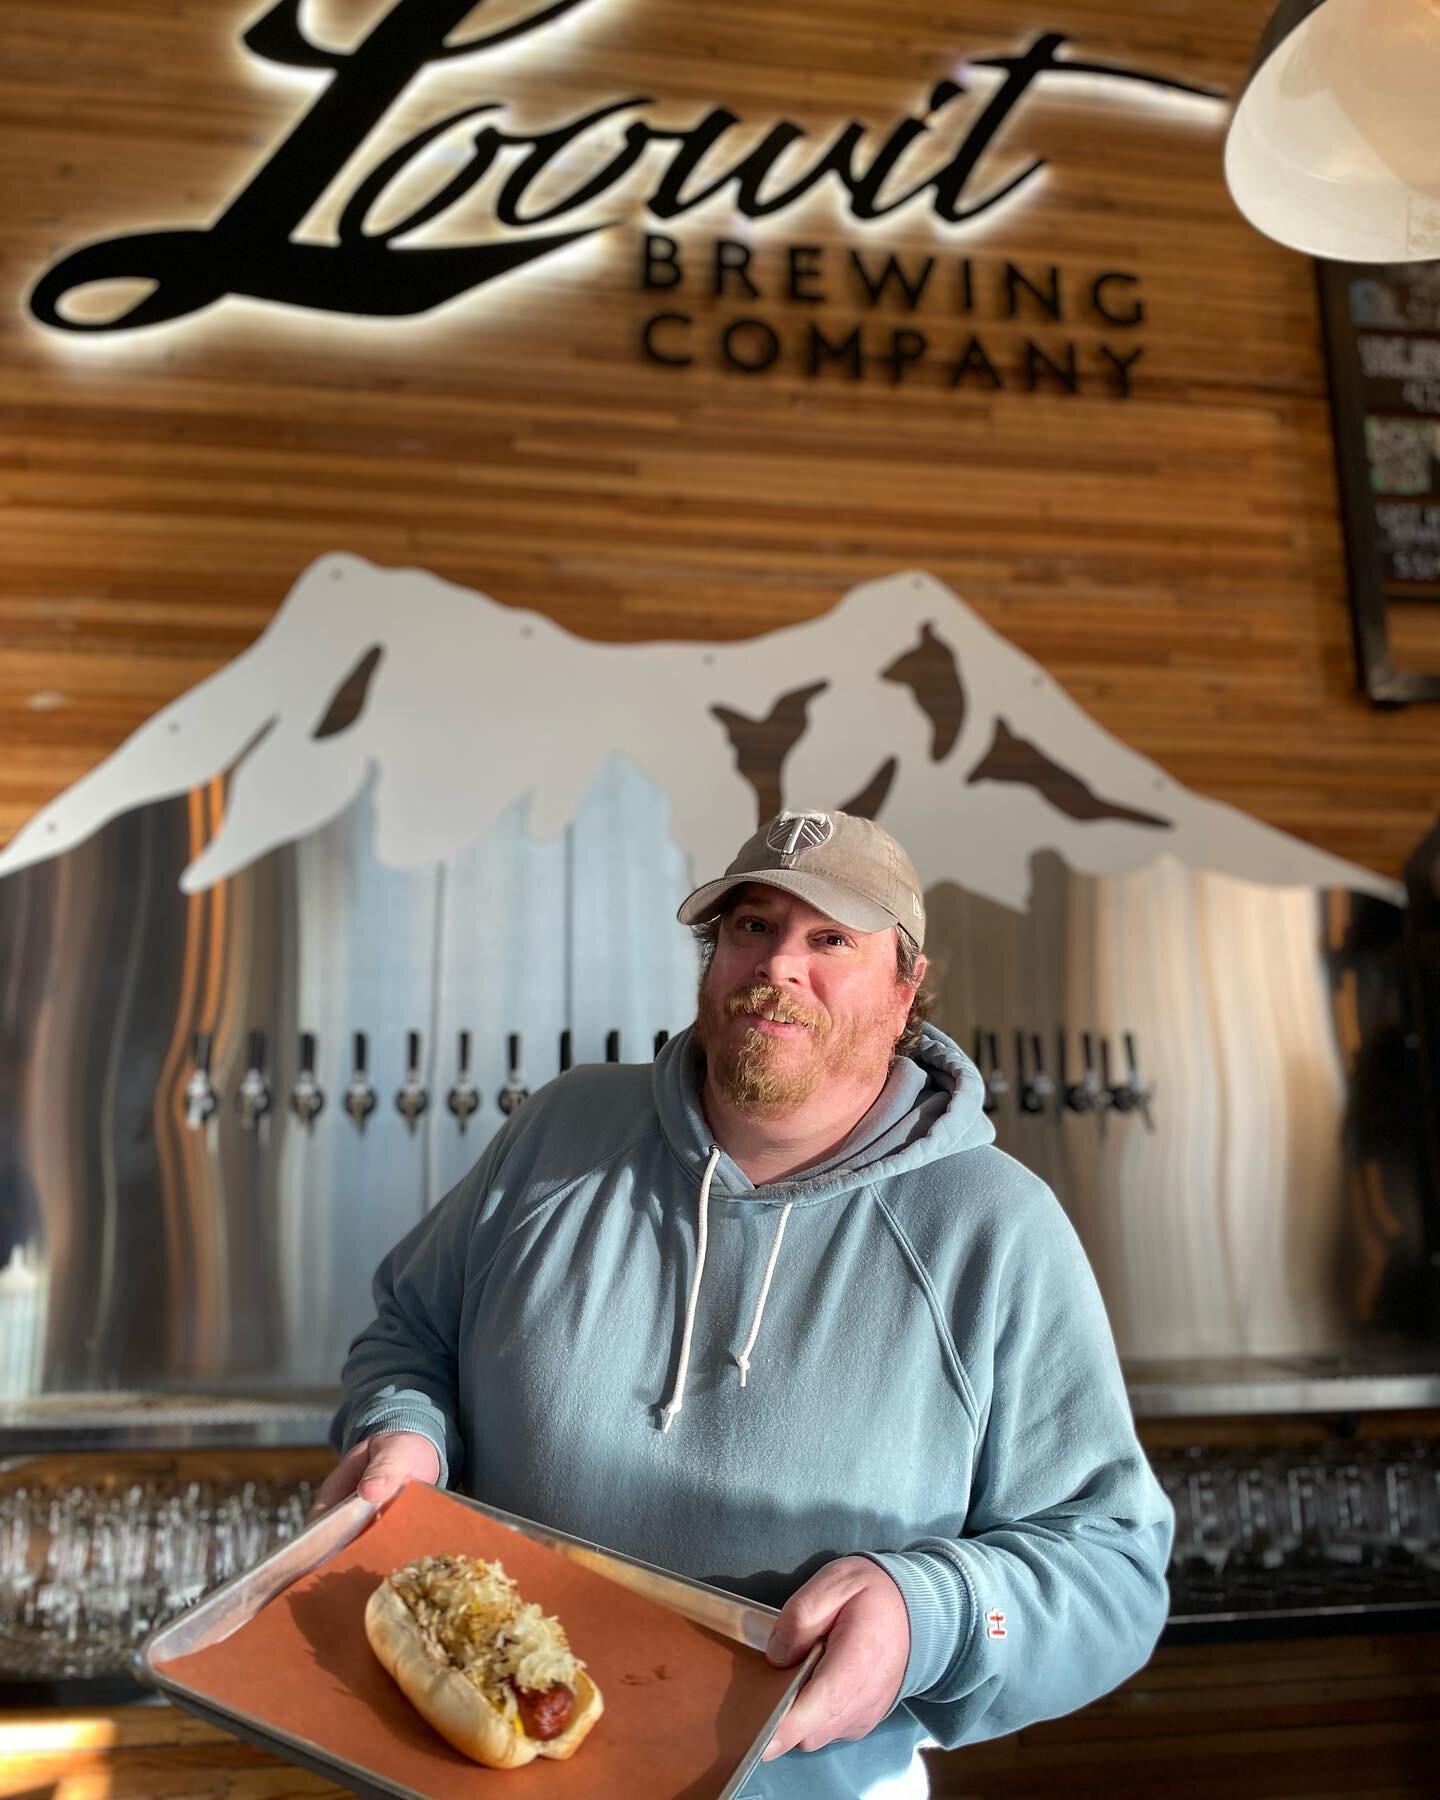 In honor of one our regulars, this week we are featuring The Steven as our Tues-Dog special. Keeping it simple we topped a 1/4 lbs Hills dog with sauerkraut and yellow mustard. Just $10 gets you a pint and special dog ONLY on Tuesday. Cheers!

#beer 